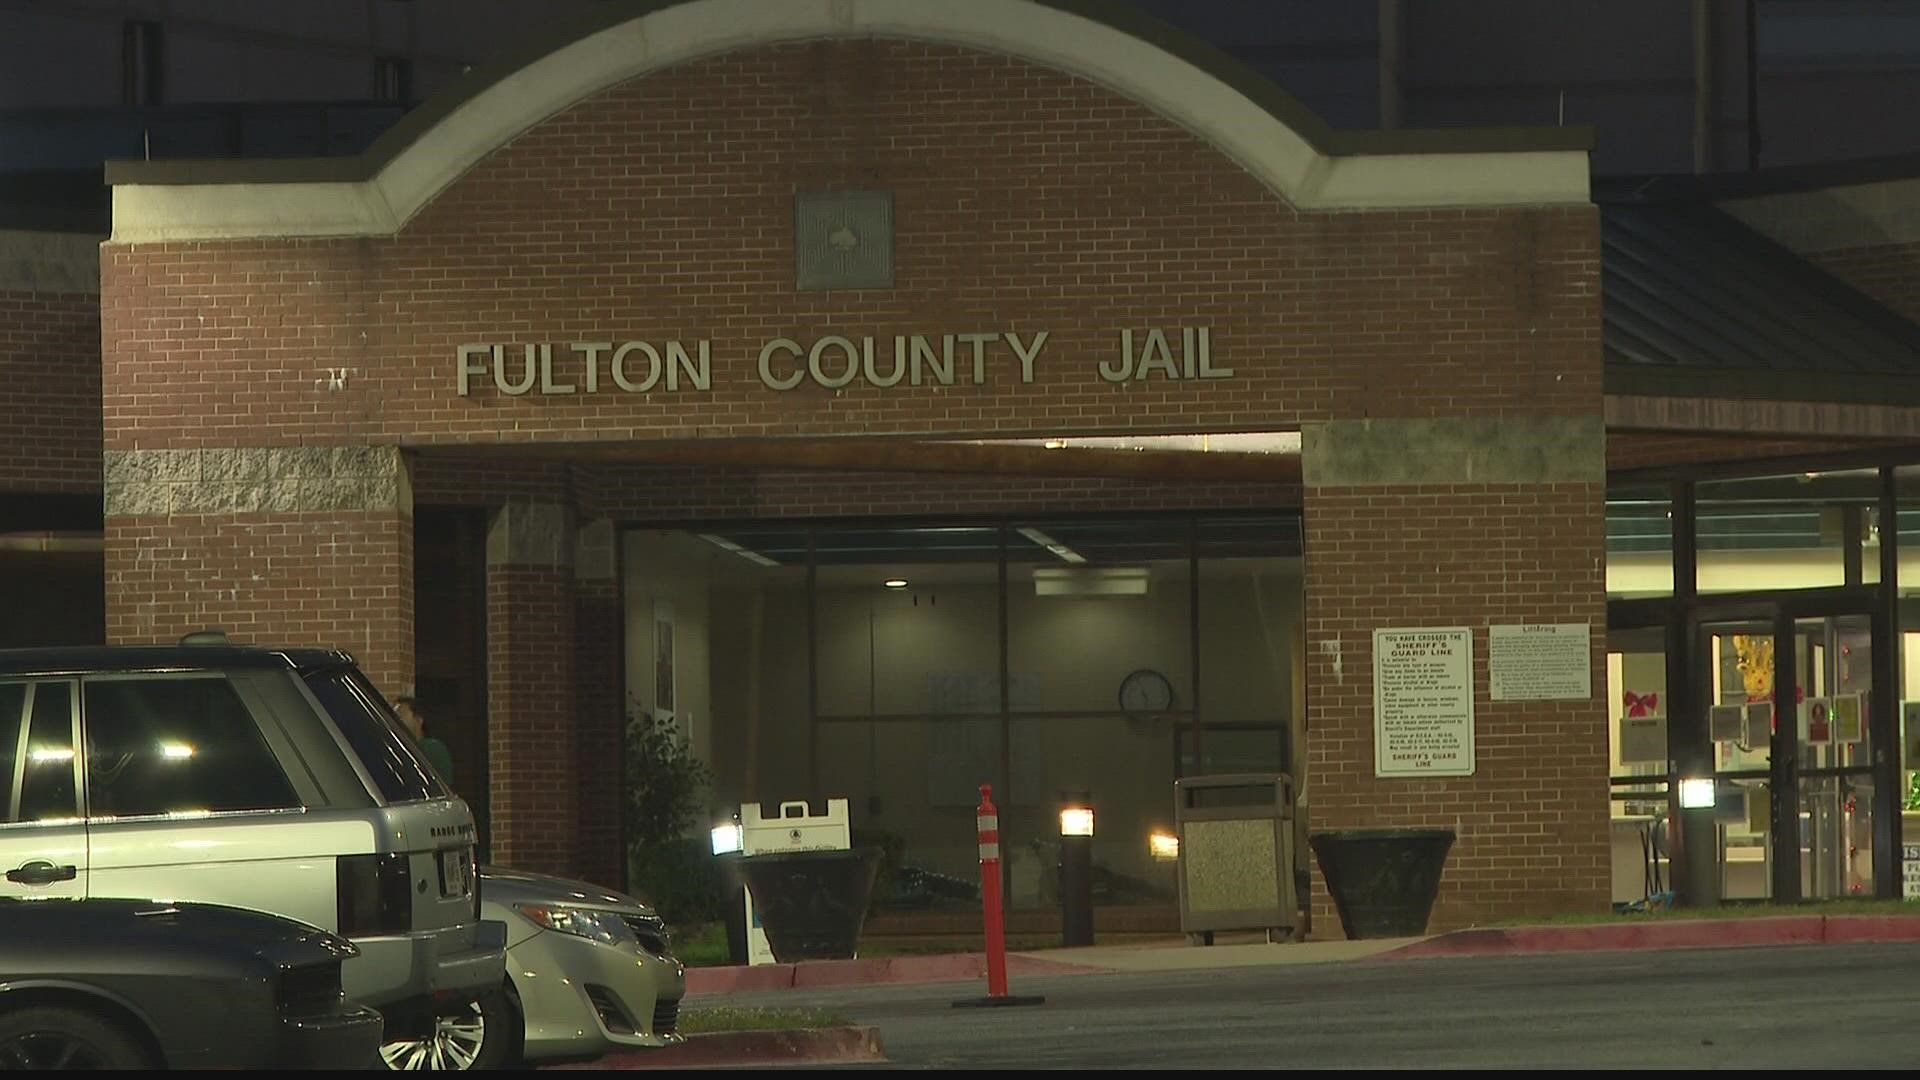 A detention officer at the Fulton County Jail was saved from a brutal attack.